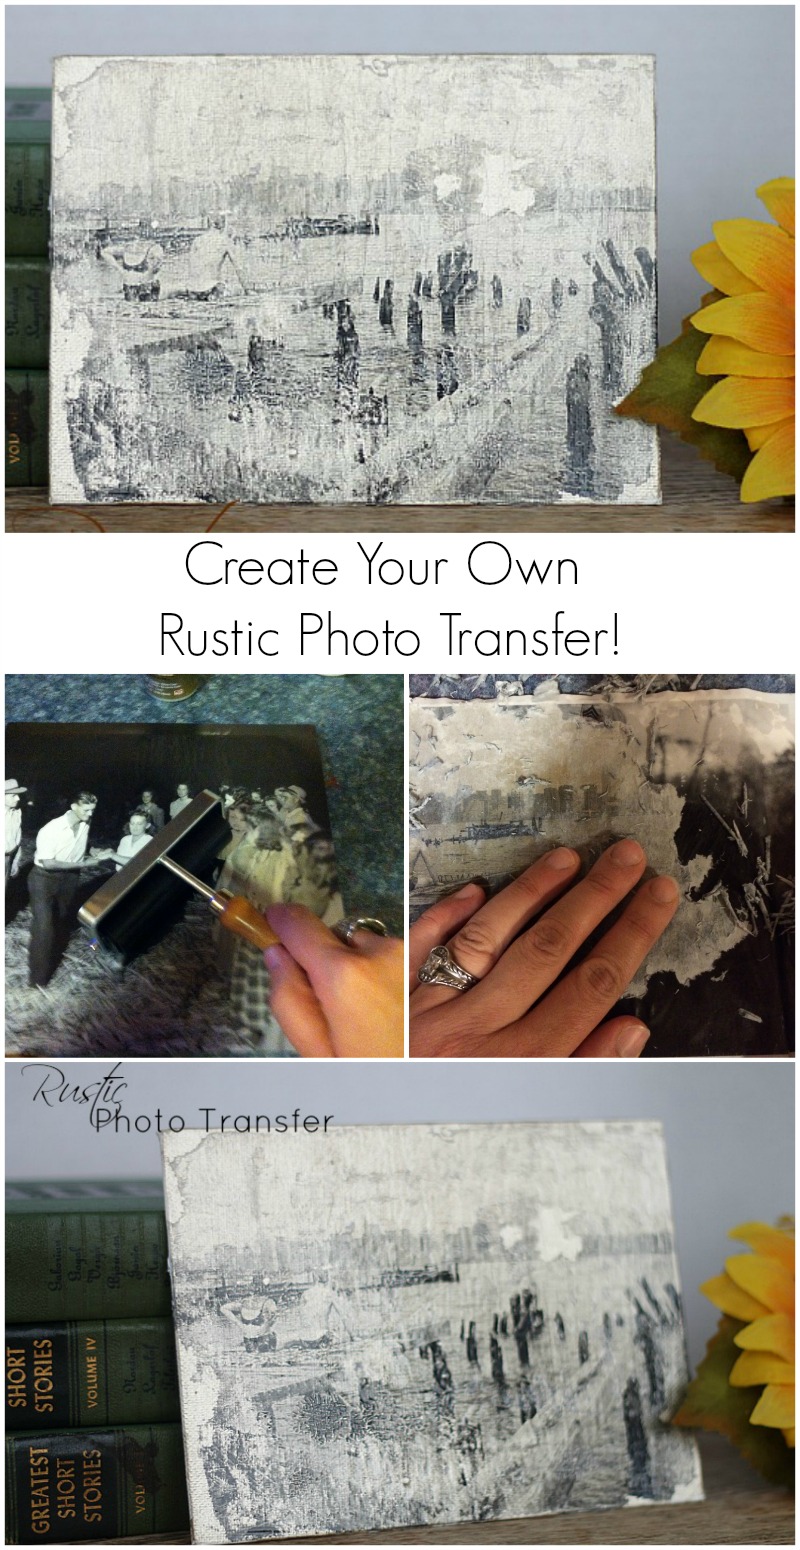 Rustic Photo Transfer--How To